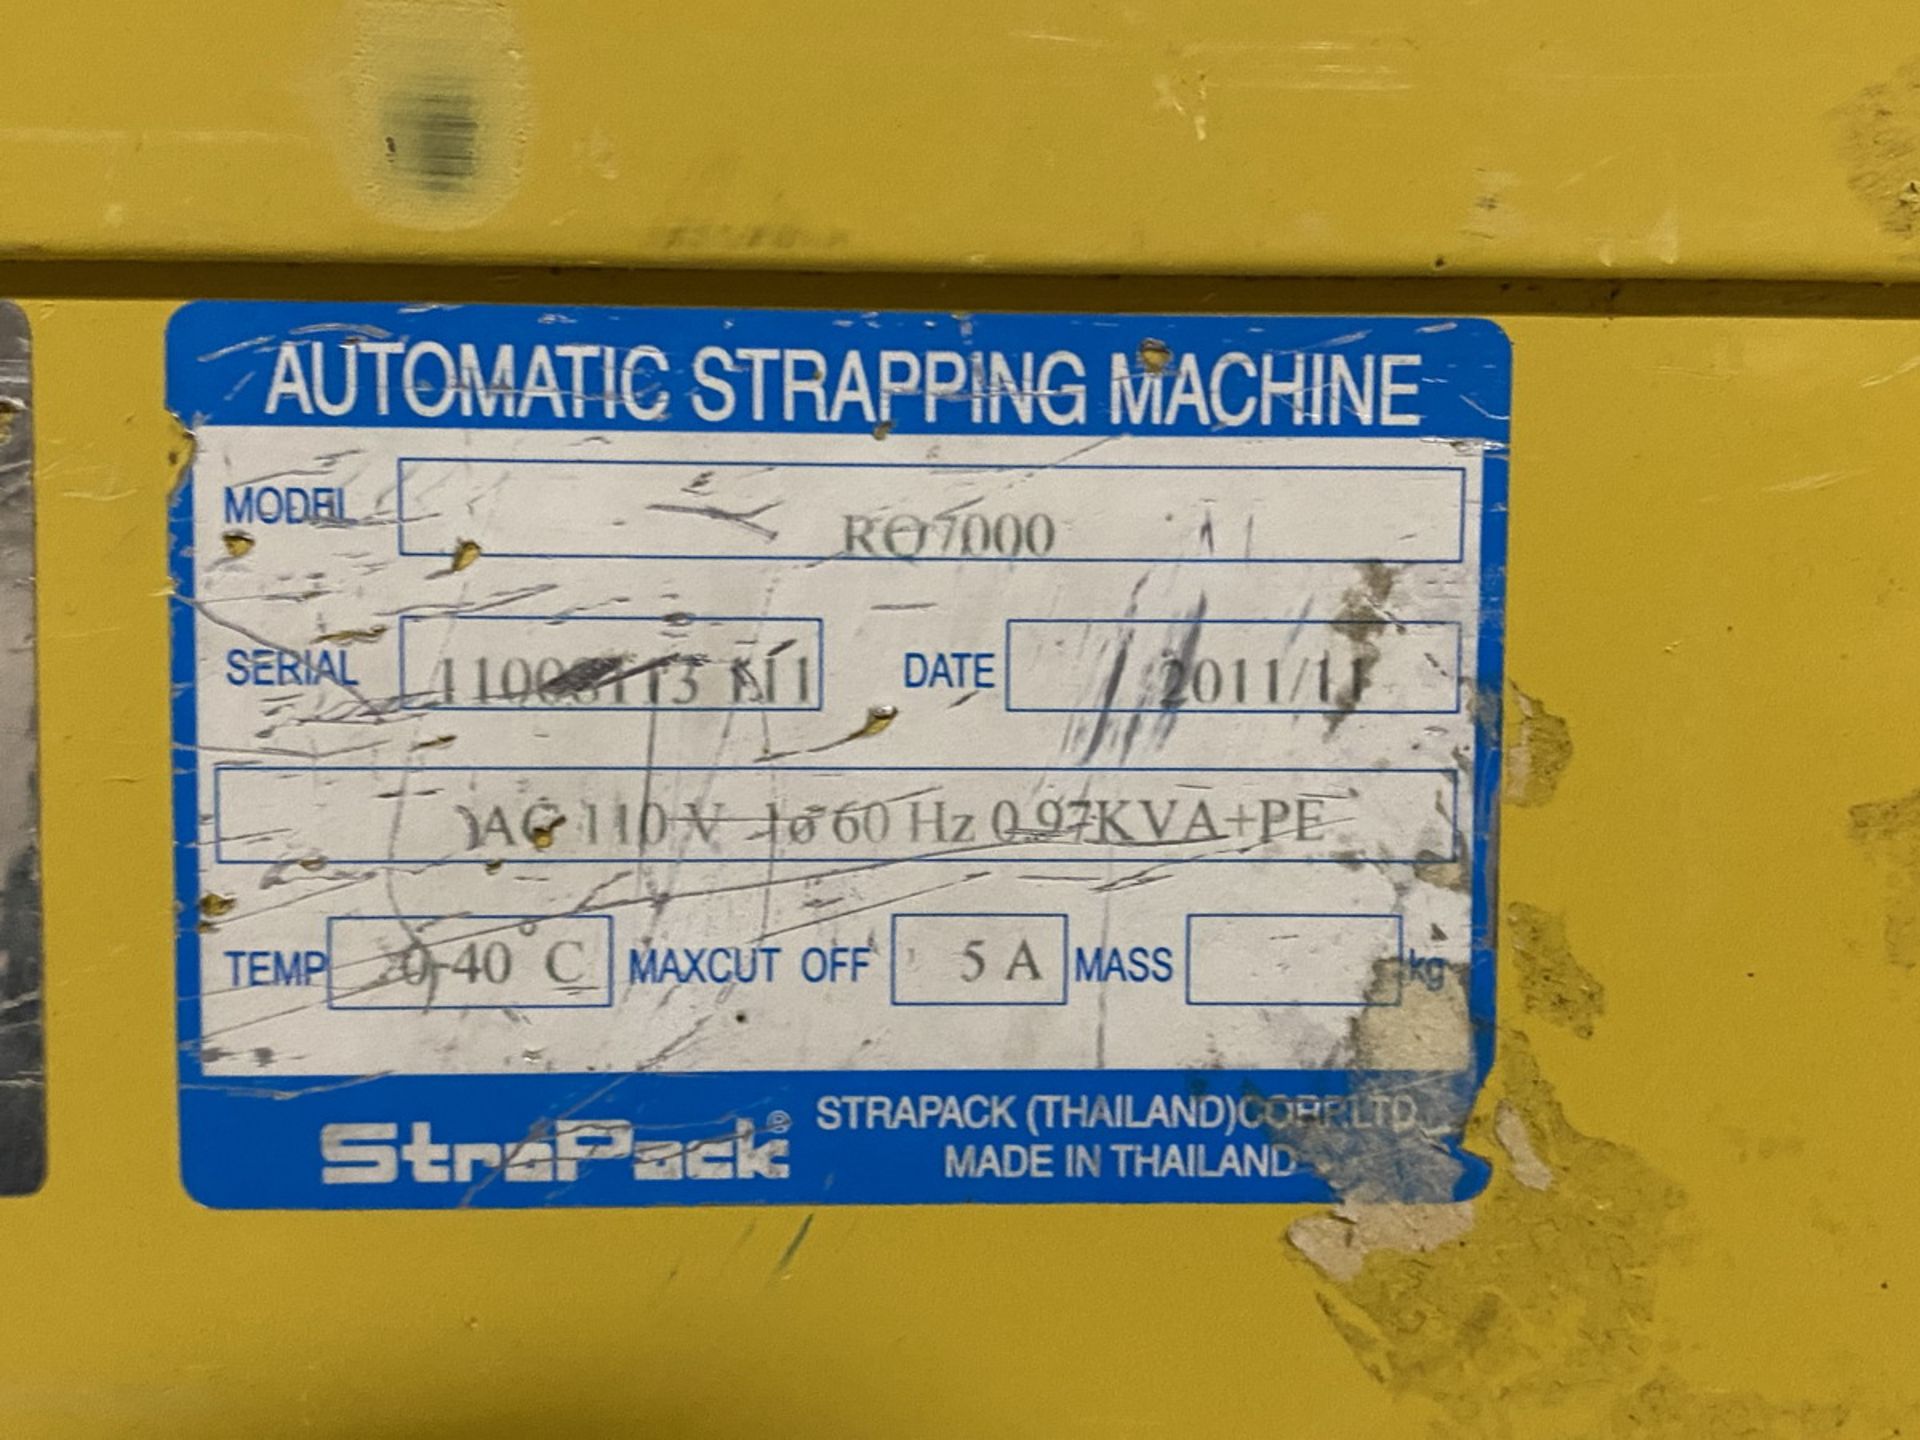 StraPack Model RQ7000 Automatic Strapping Machine, S/N: 11008113 111 (2011) - (Located In: Bedford - Image 3 of 3